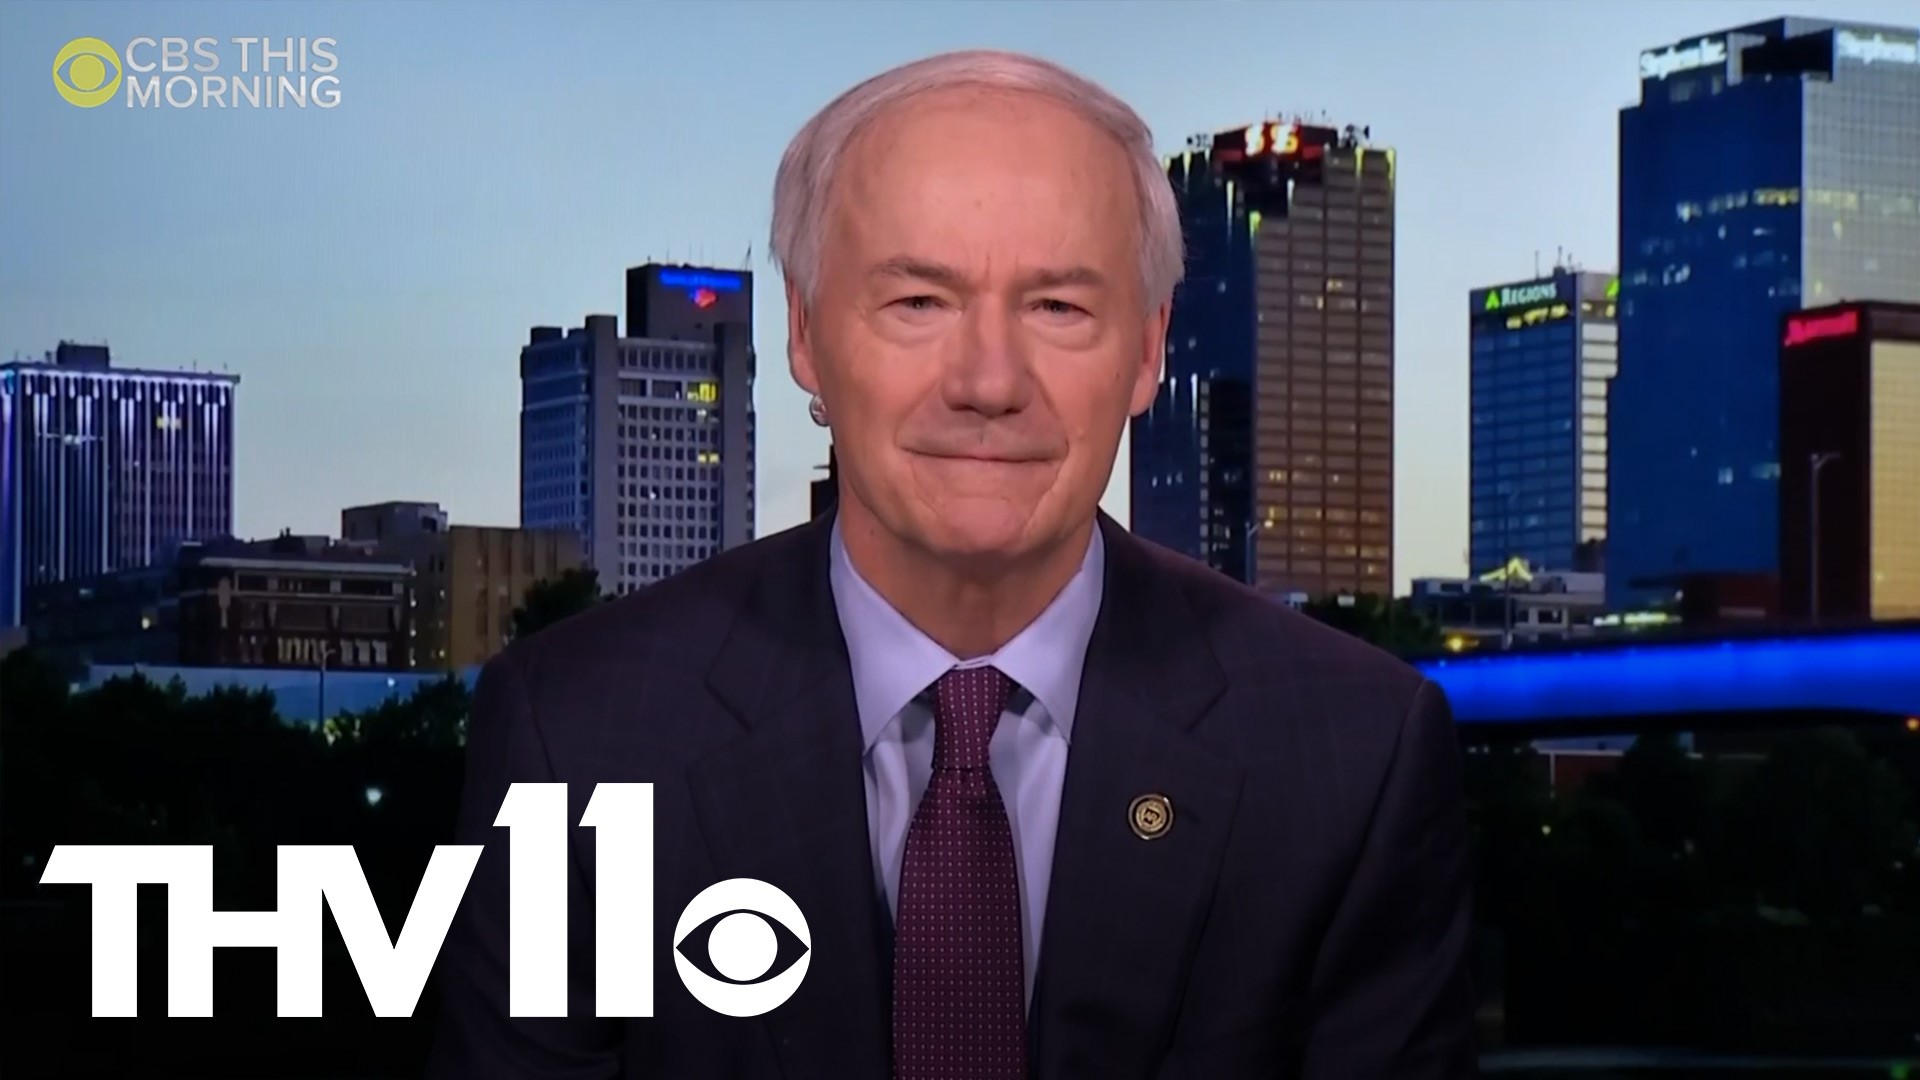 In an interview on CBS This Morning, Gov. Hutchinson spoke on the "challenging time" Arkansas faces with the COVID-19 surge and discussed President-Elect Joe Biden.